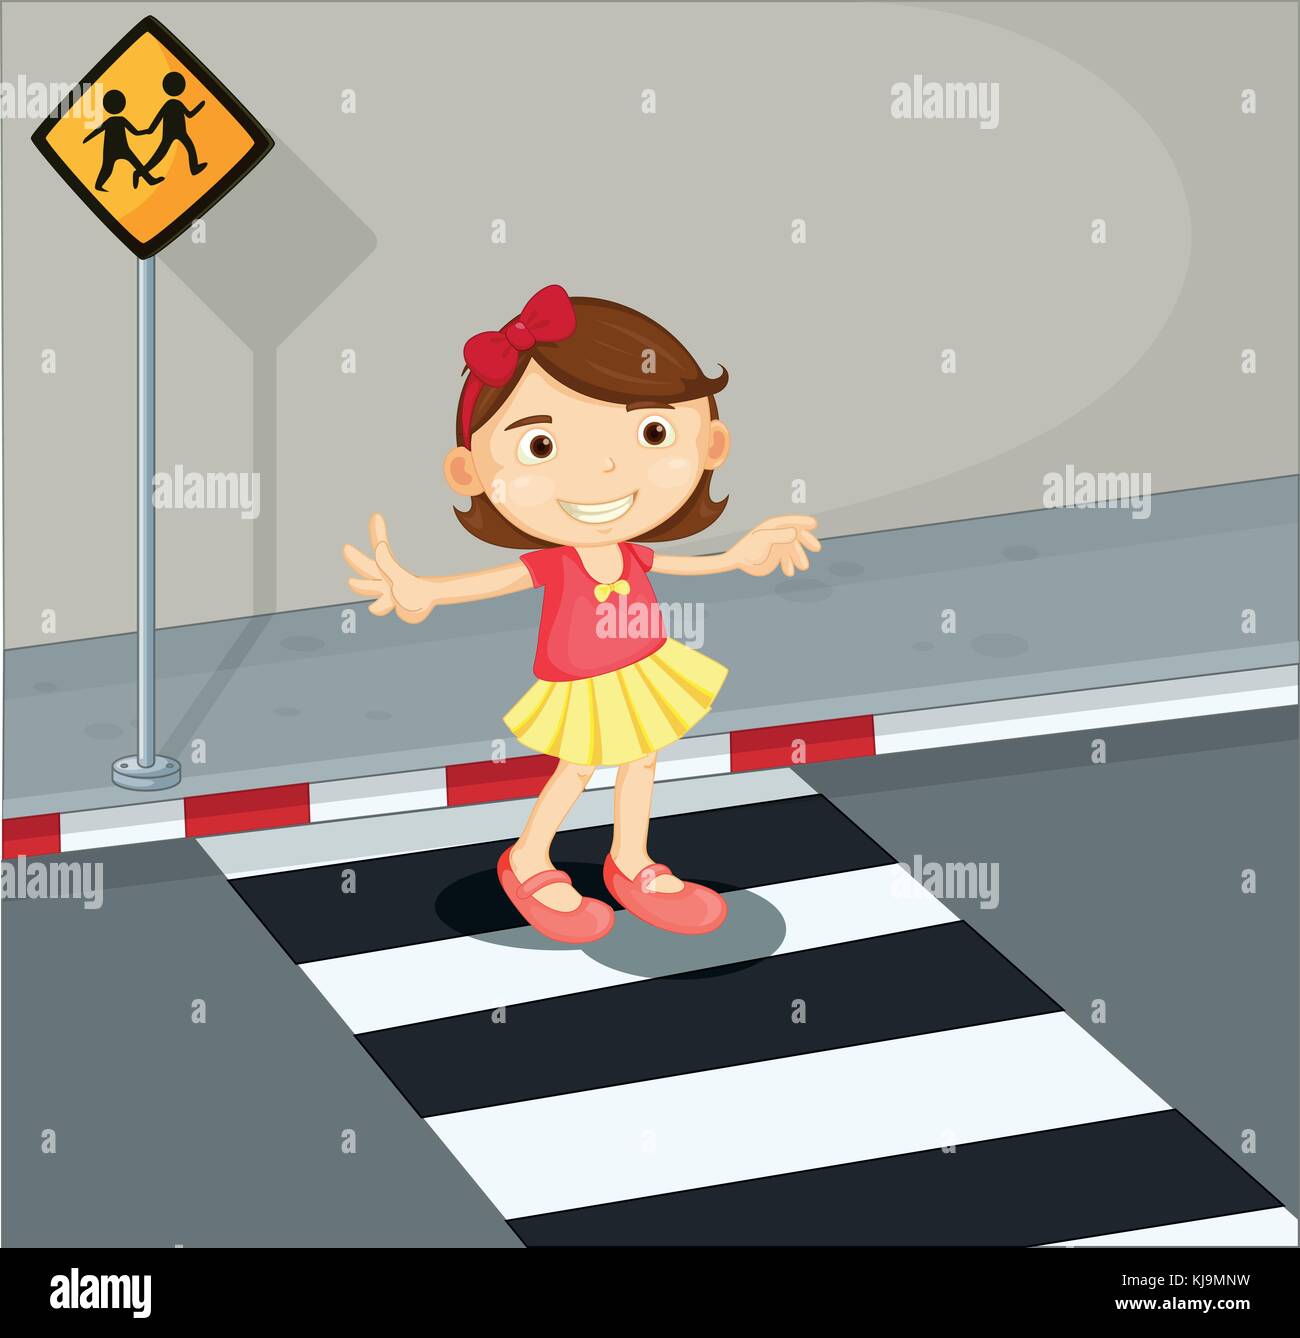 Illustration of a girl in the pedestrian lane Stock Vector